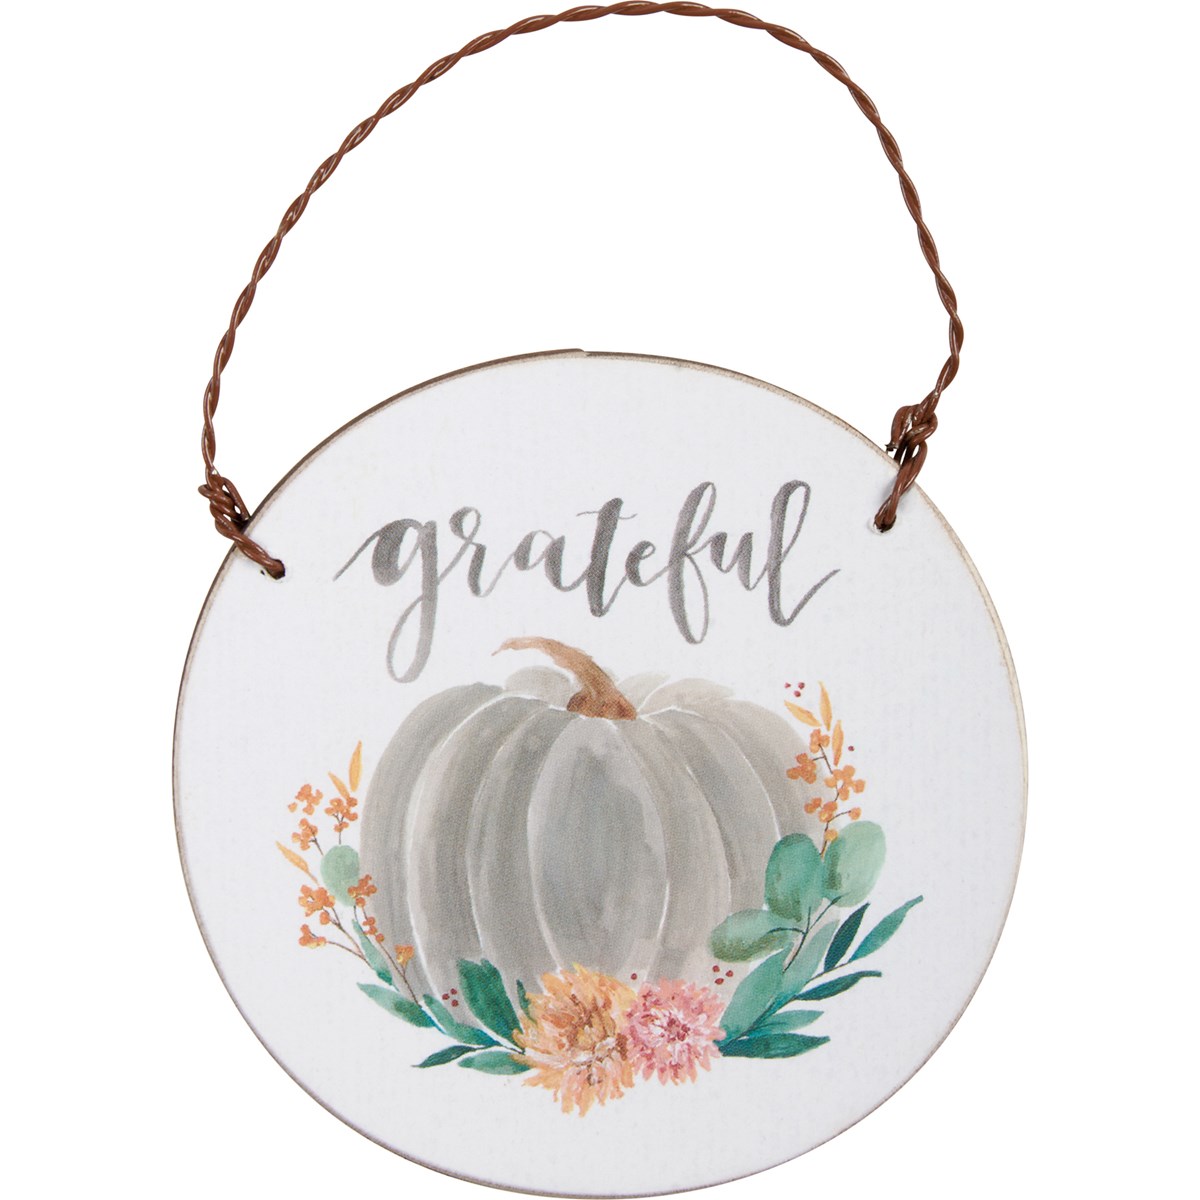 Ornament Set - Blessed - 3" Diameter x 0.25" - Wood, Paper, Wire